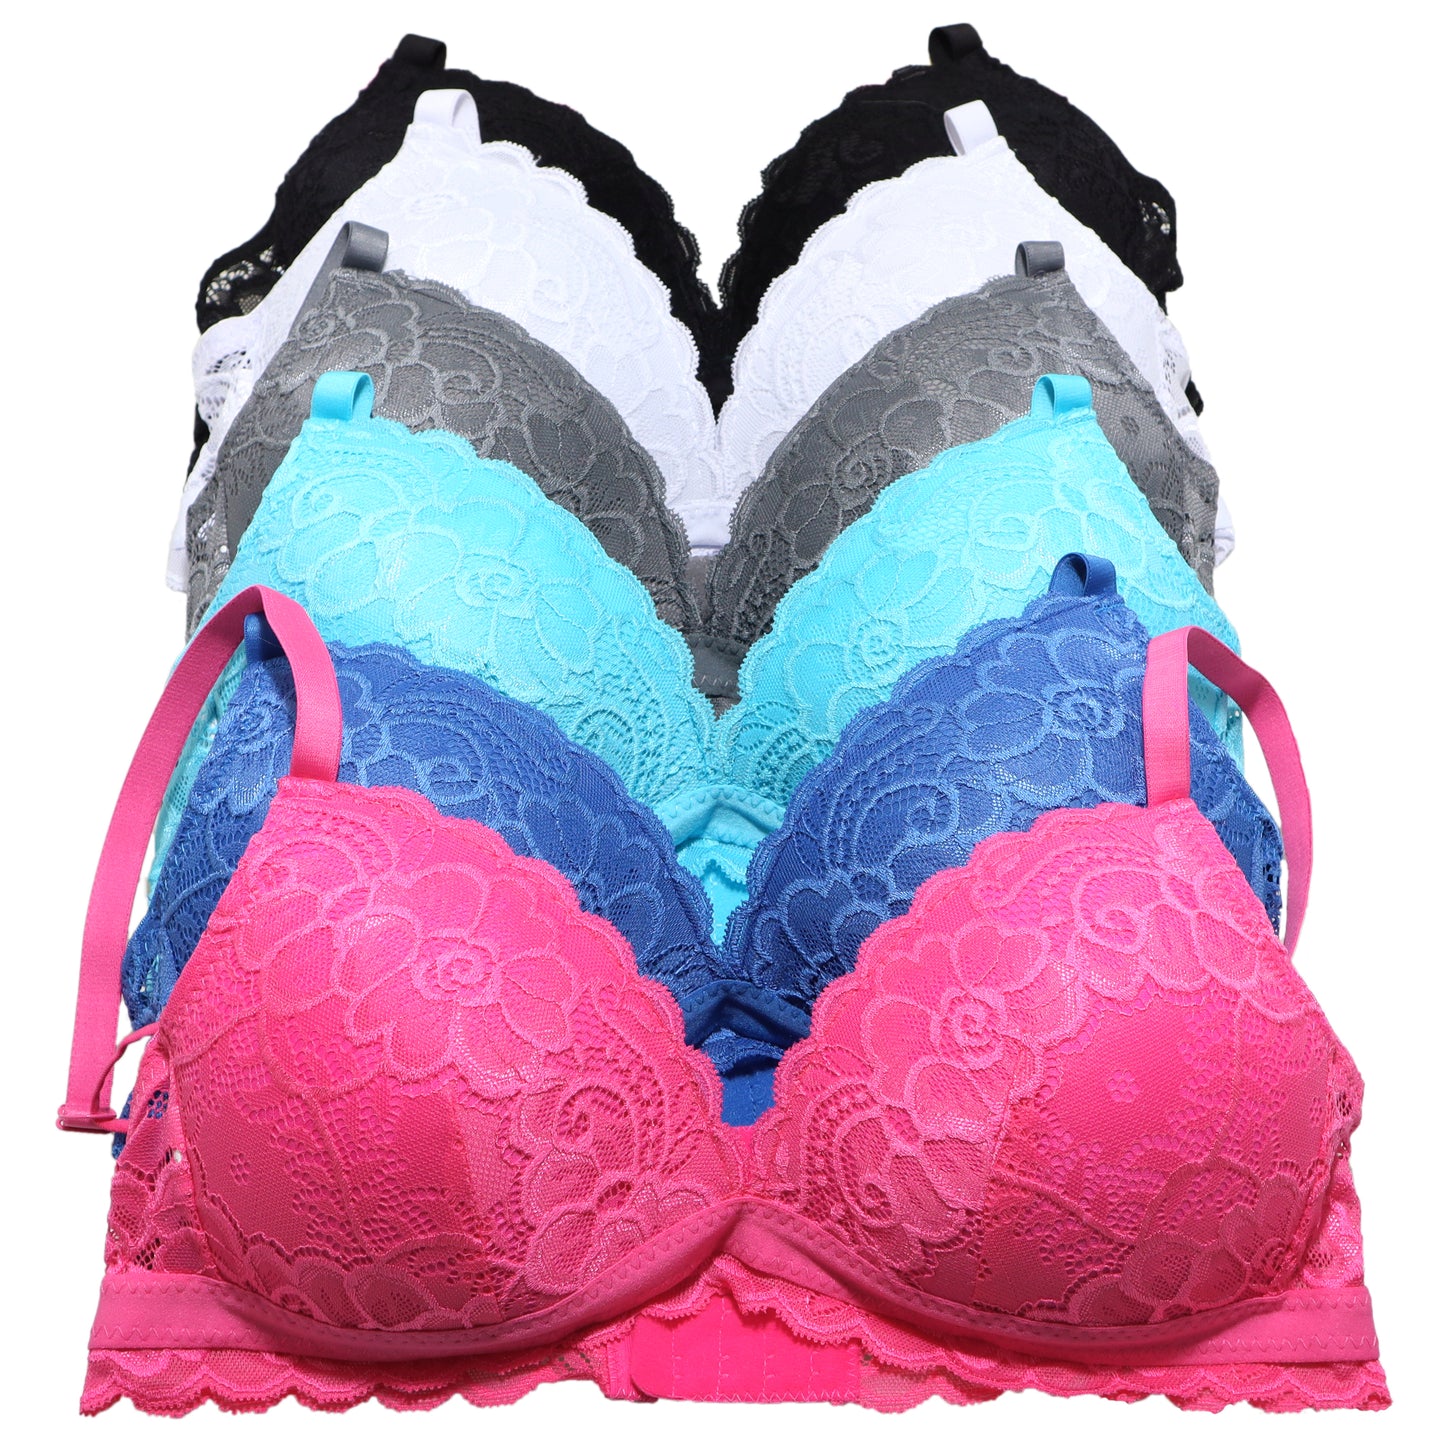 Wire-Free Demi-Cup Floral Lace Bras with Wide-Wing Support (6-Pack)